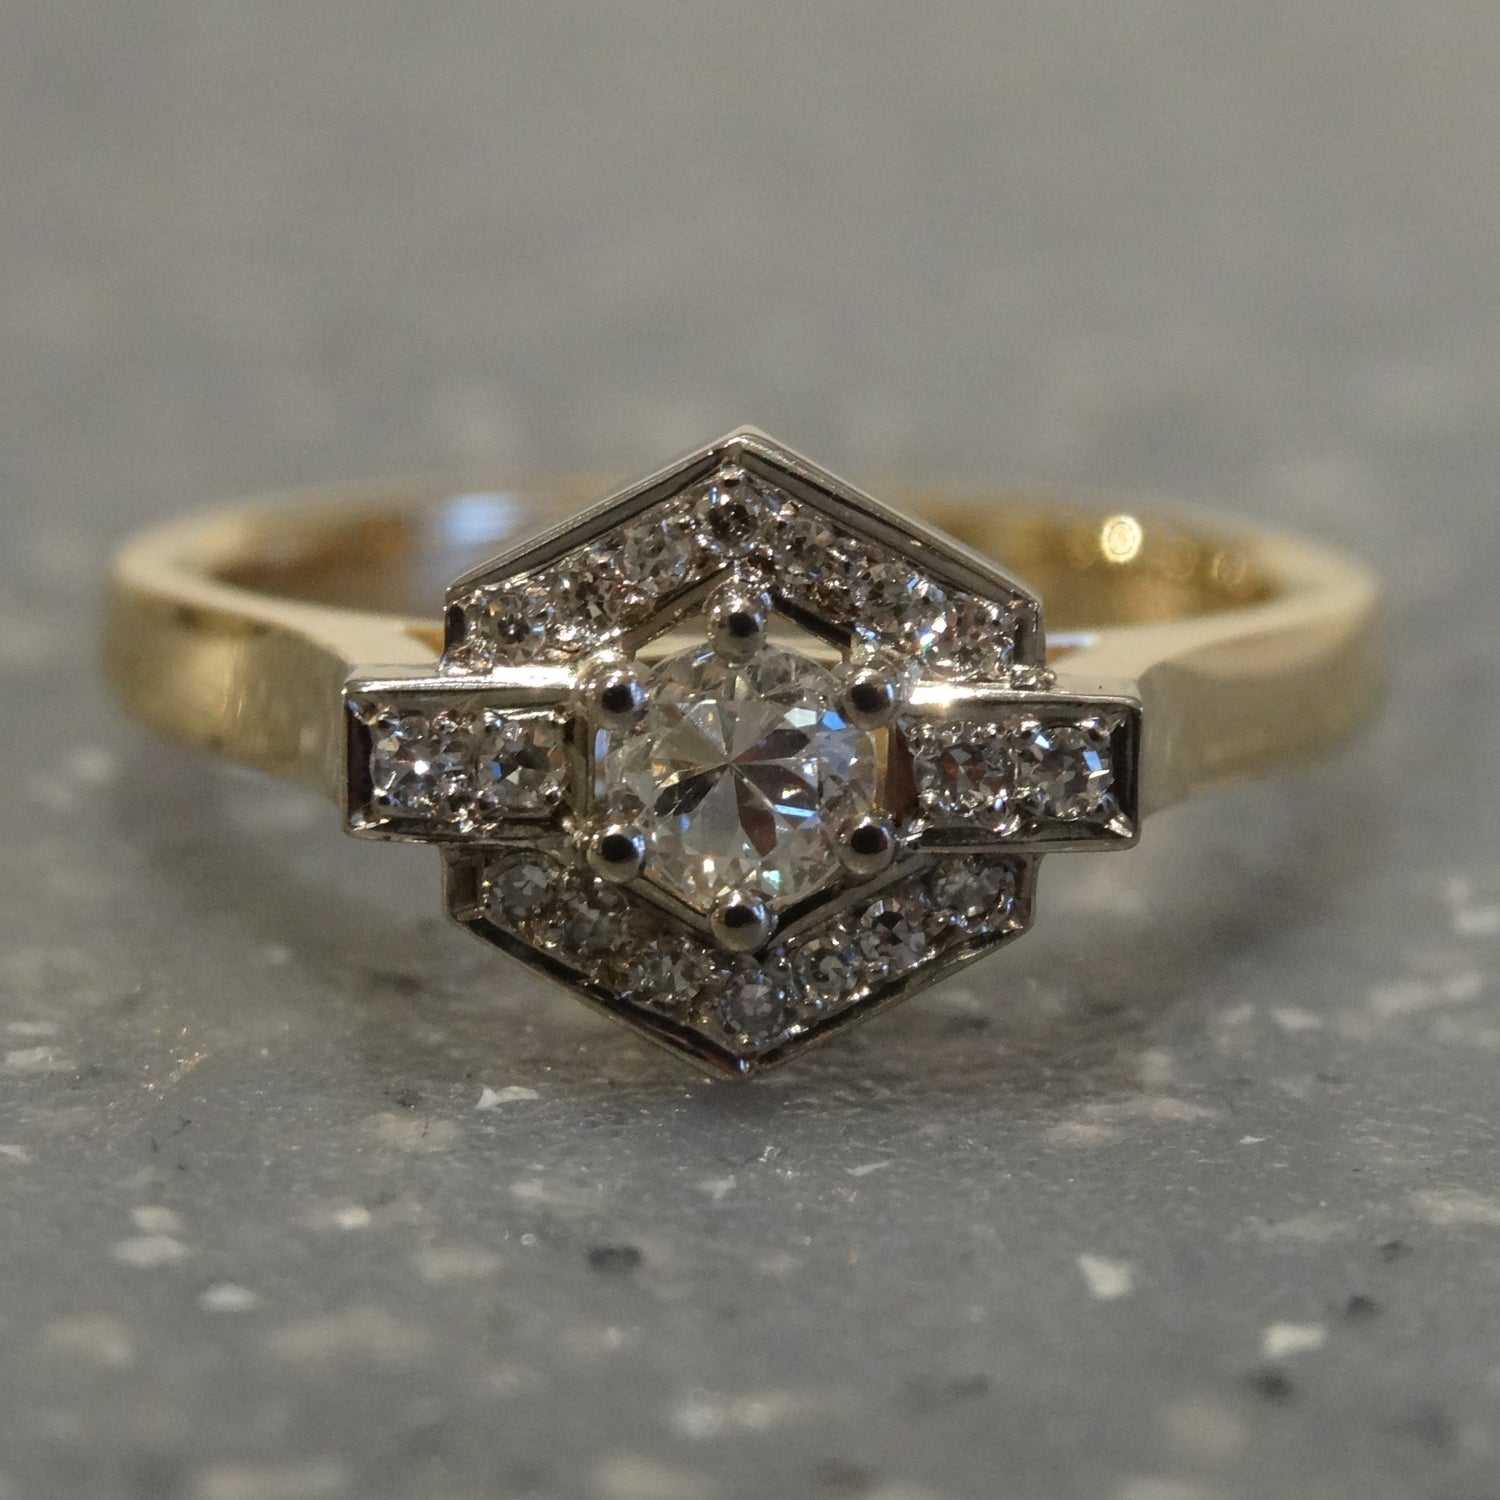 a two tone engagement ring set with one large round single cut diamond and a hexagonal halo set with small round diamonds